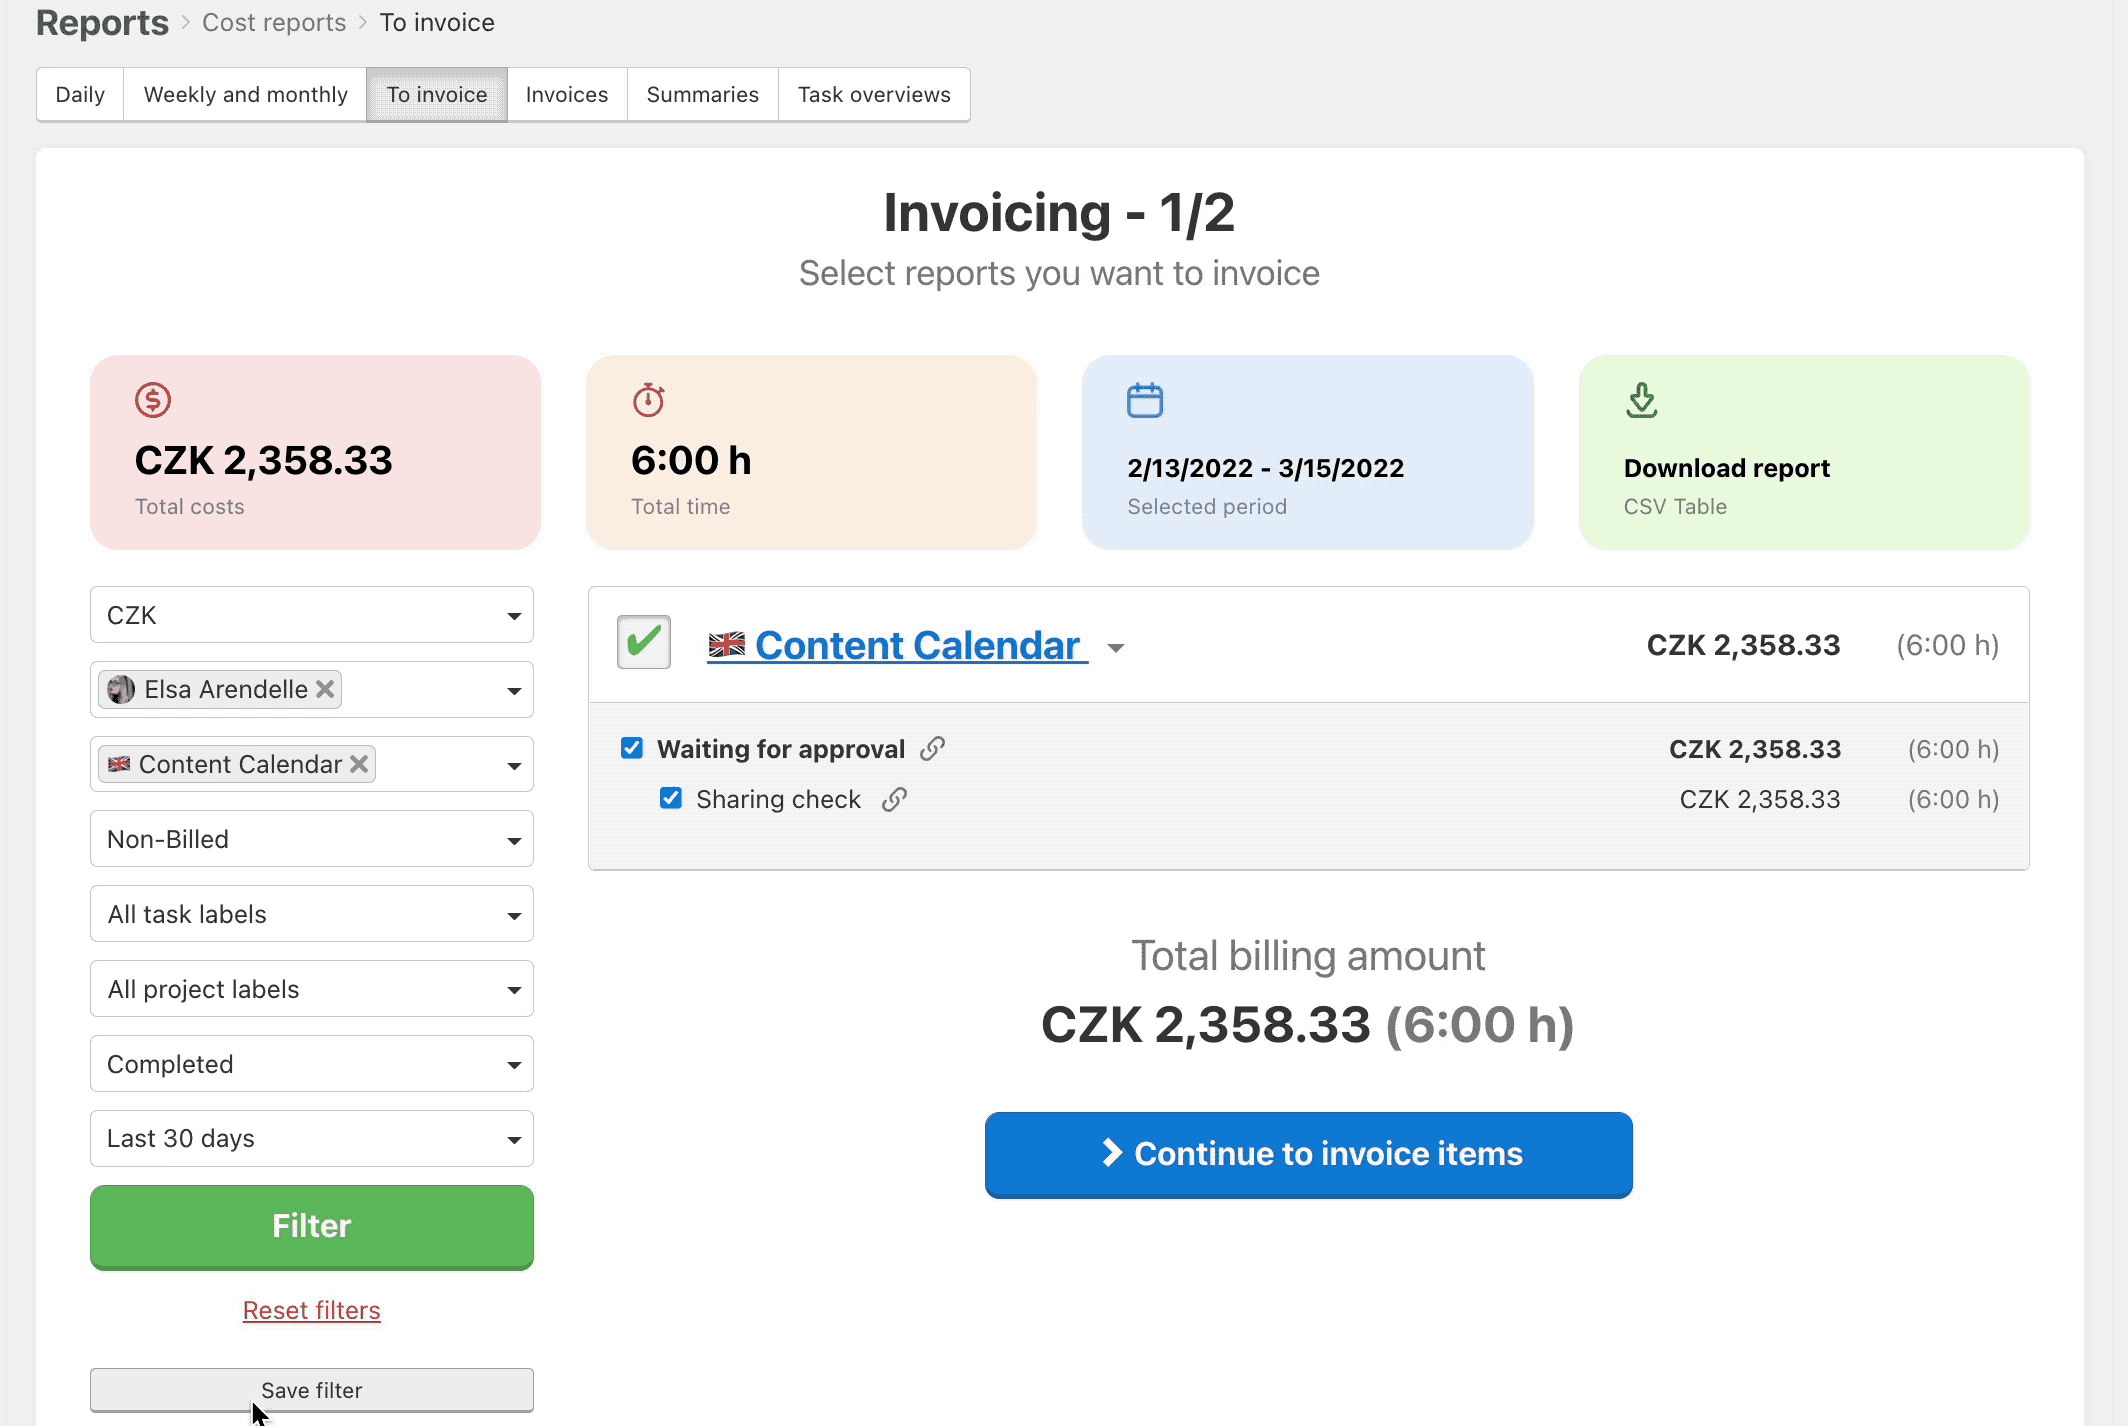 This is how you save filters on billing items.